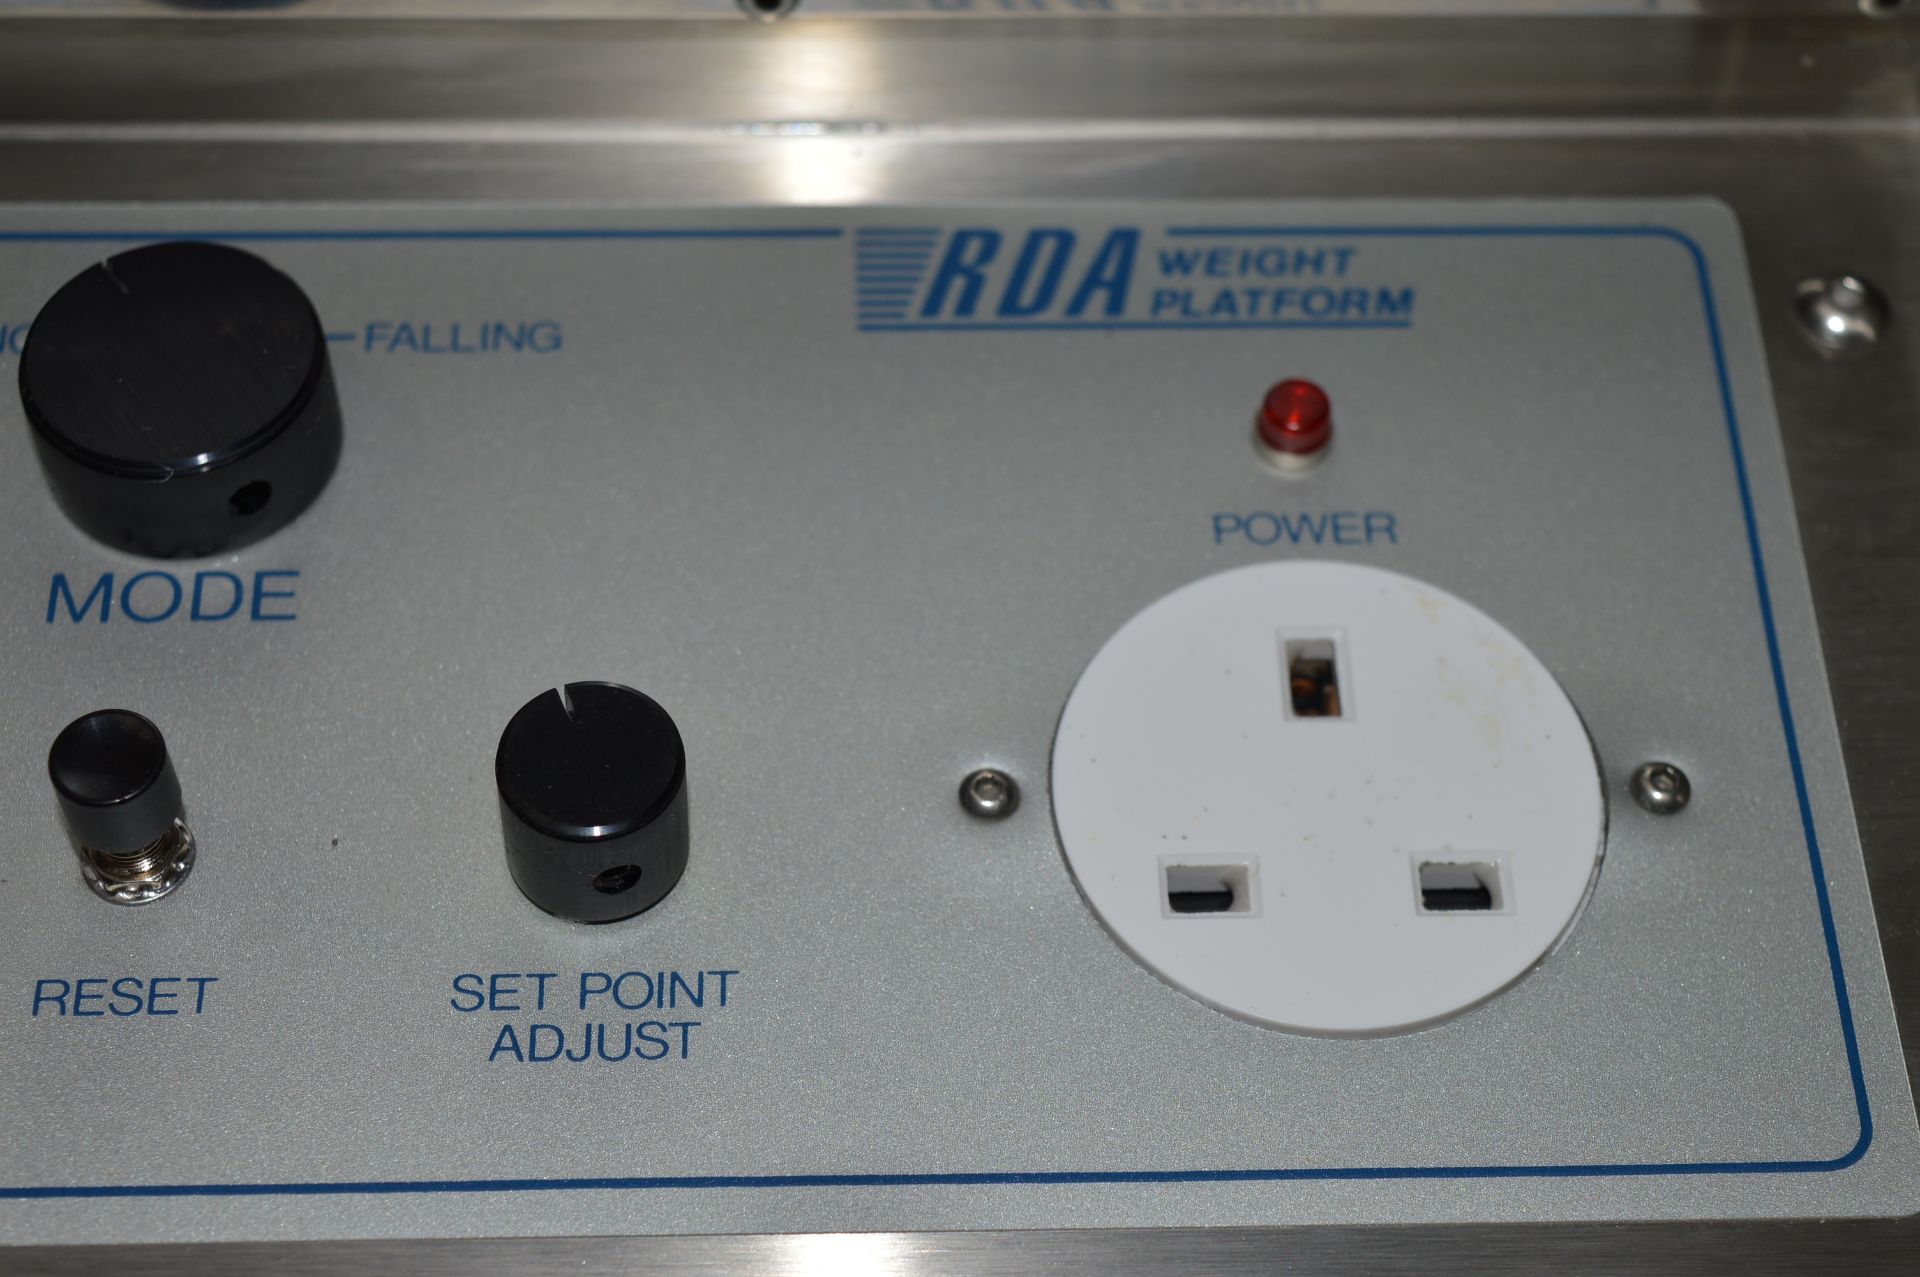 1 x RDA Professional Weight Platform Scale - CL011 - Designed For Refilling Refrigerant Cylinders, - Image 12 of 12